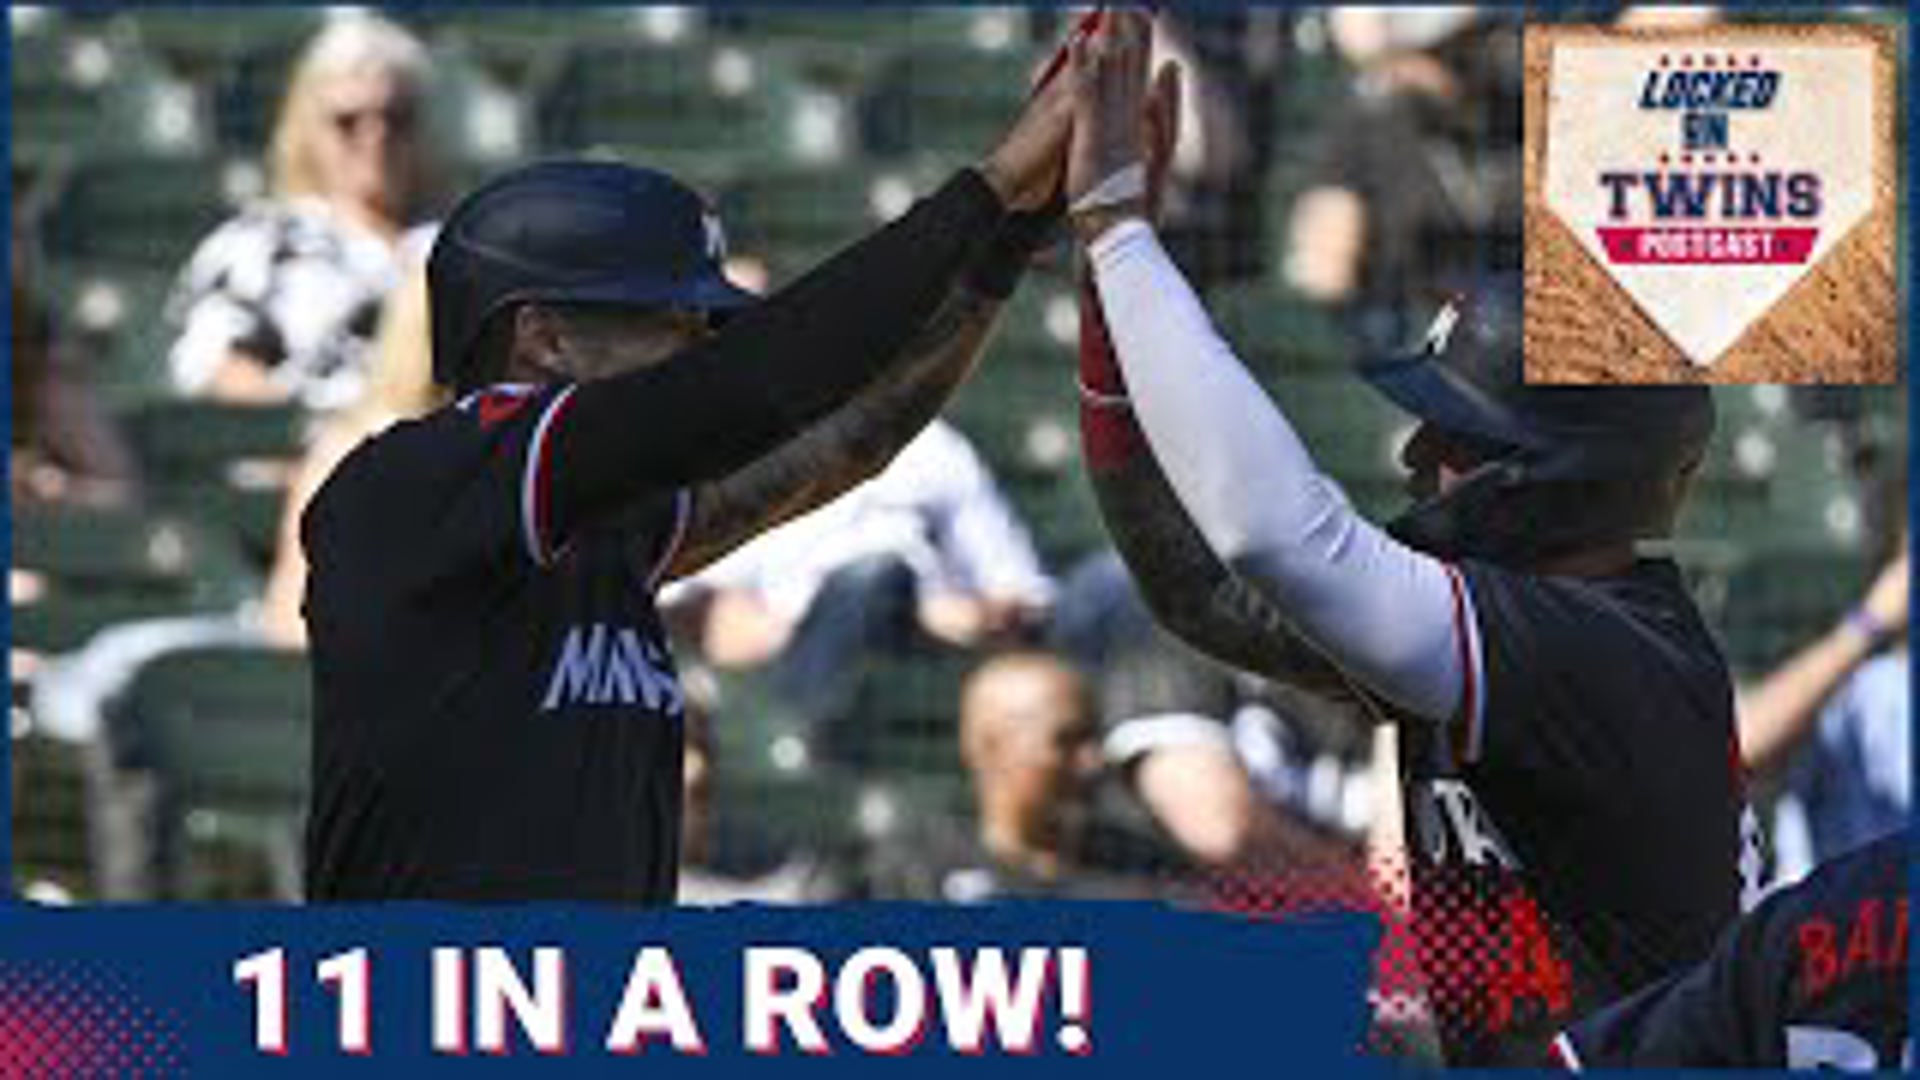 The Minnesota Twins have won 11 in a row for the first time since 2006. Join Luke Inman for the instant breakdown and reaction.